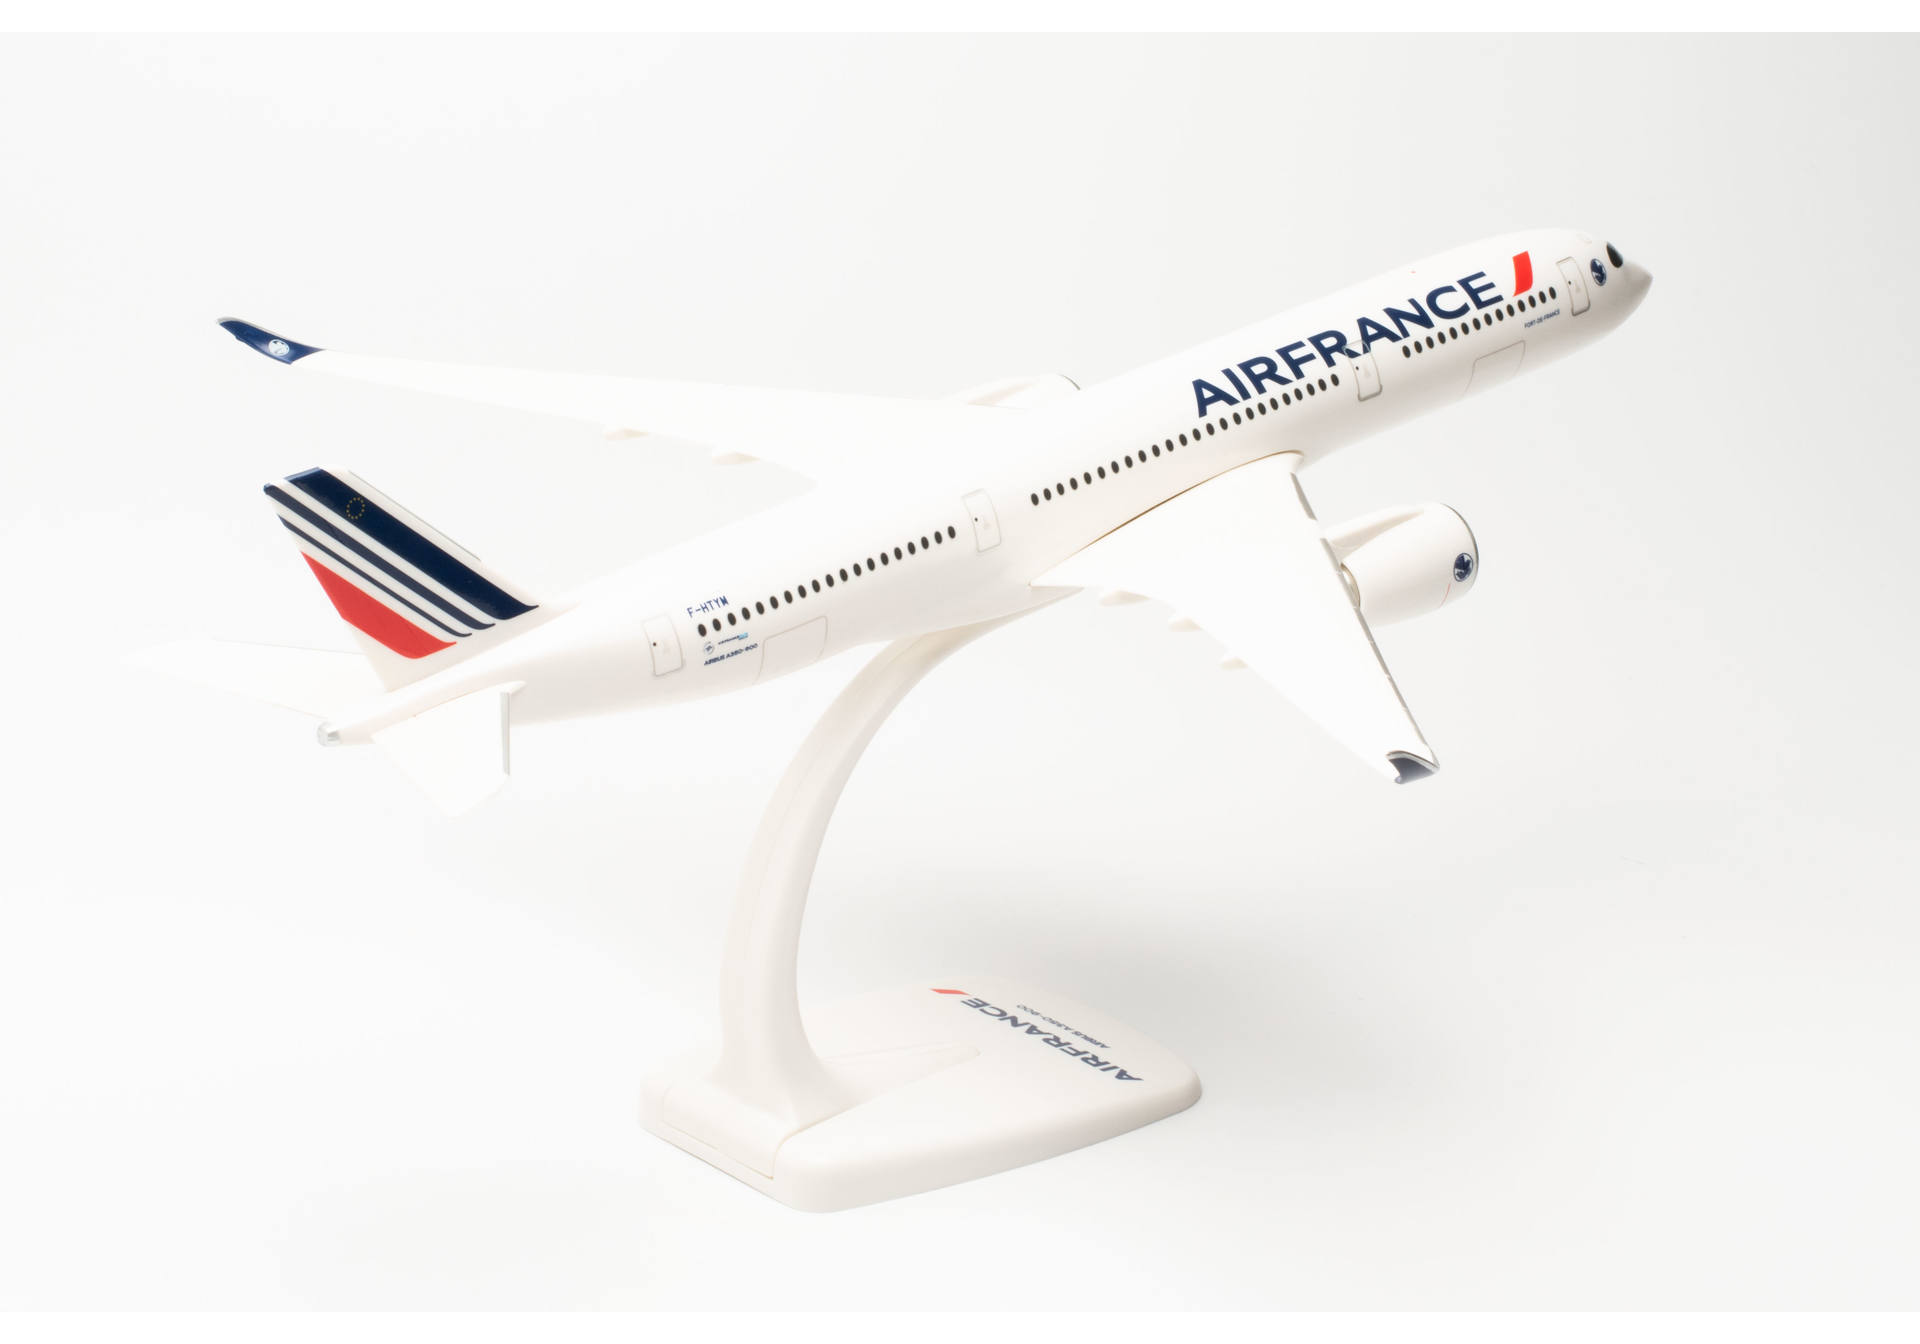 Air France Airbus A350-900 - 2021 livery – F-HTYM “Fort-de-France”